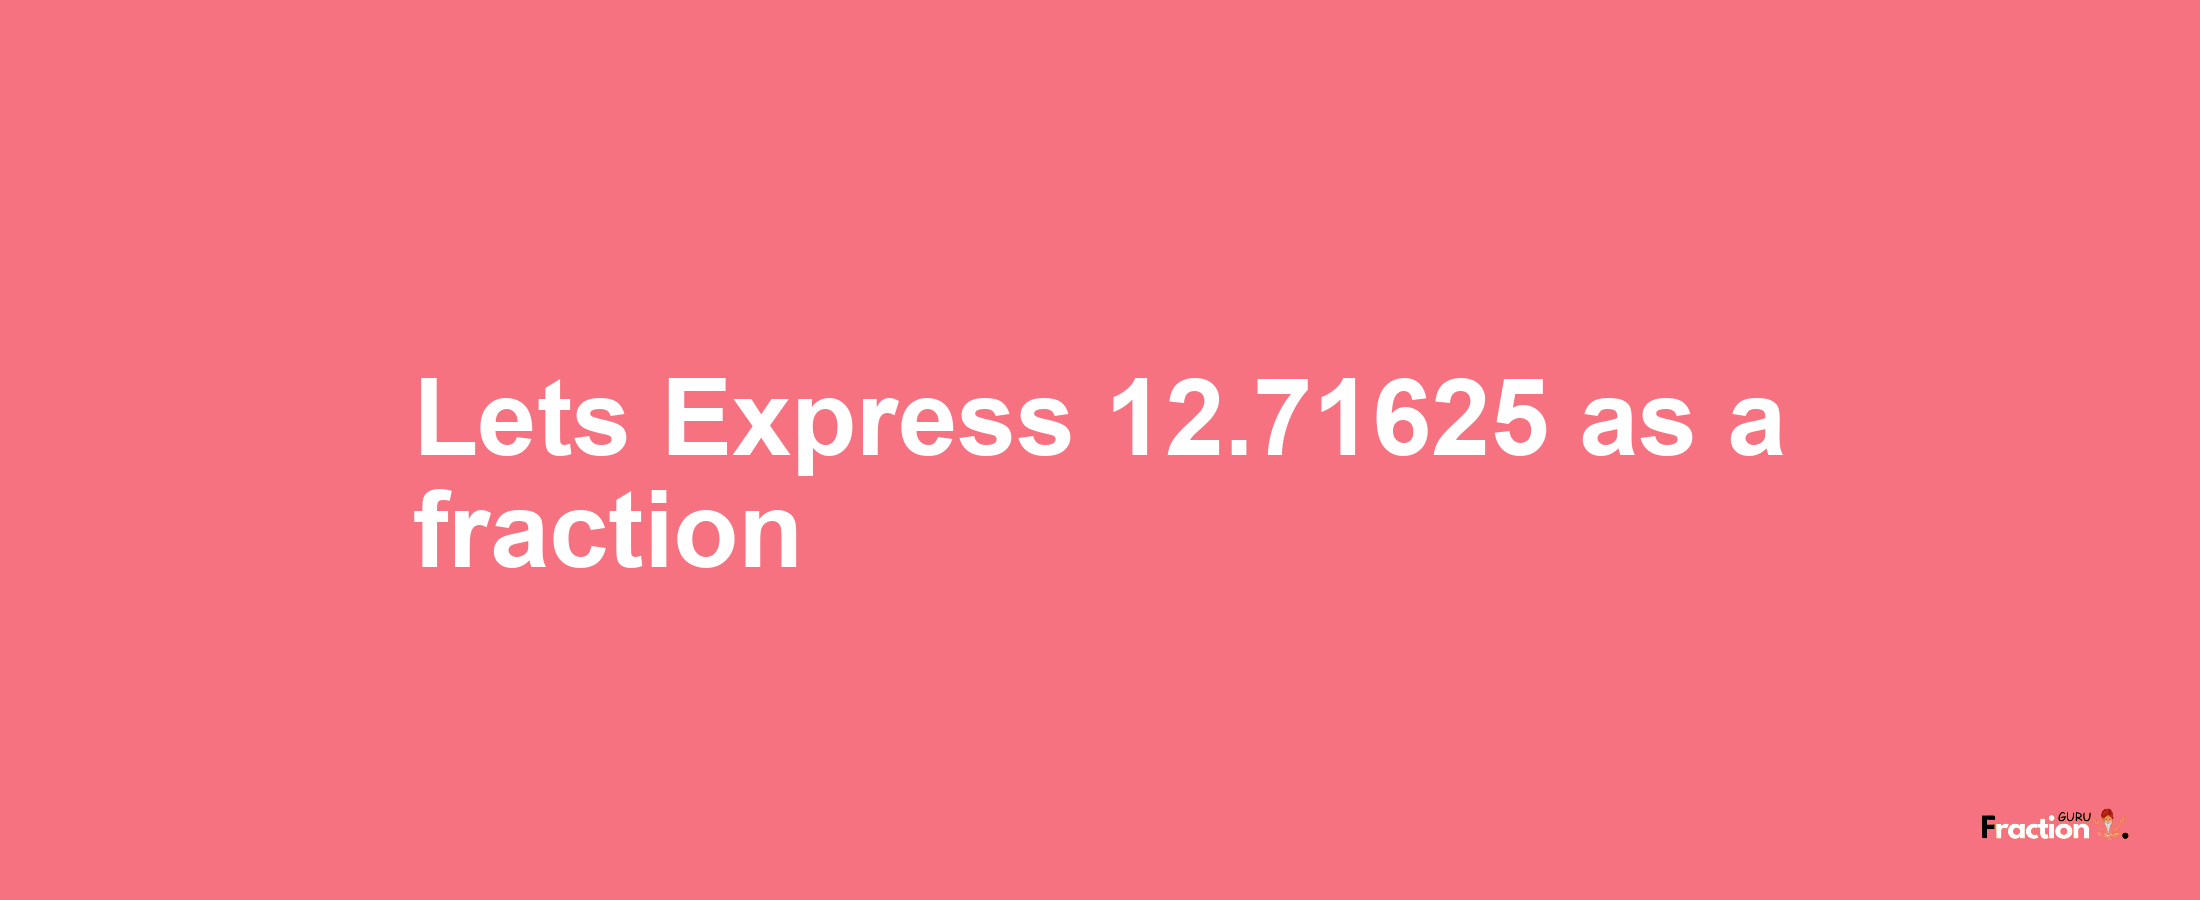 Lets Express 12.71625 as afraction